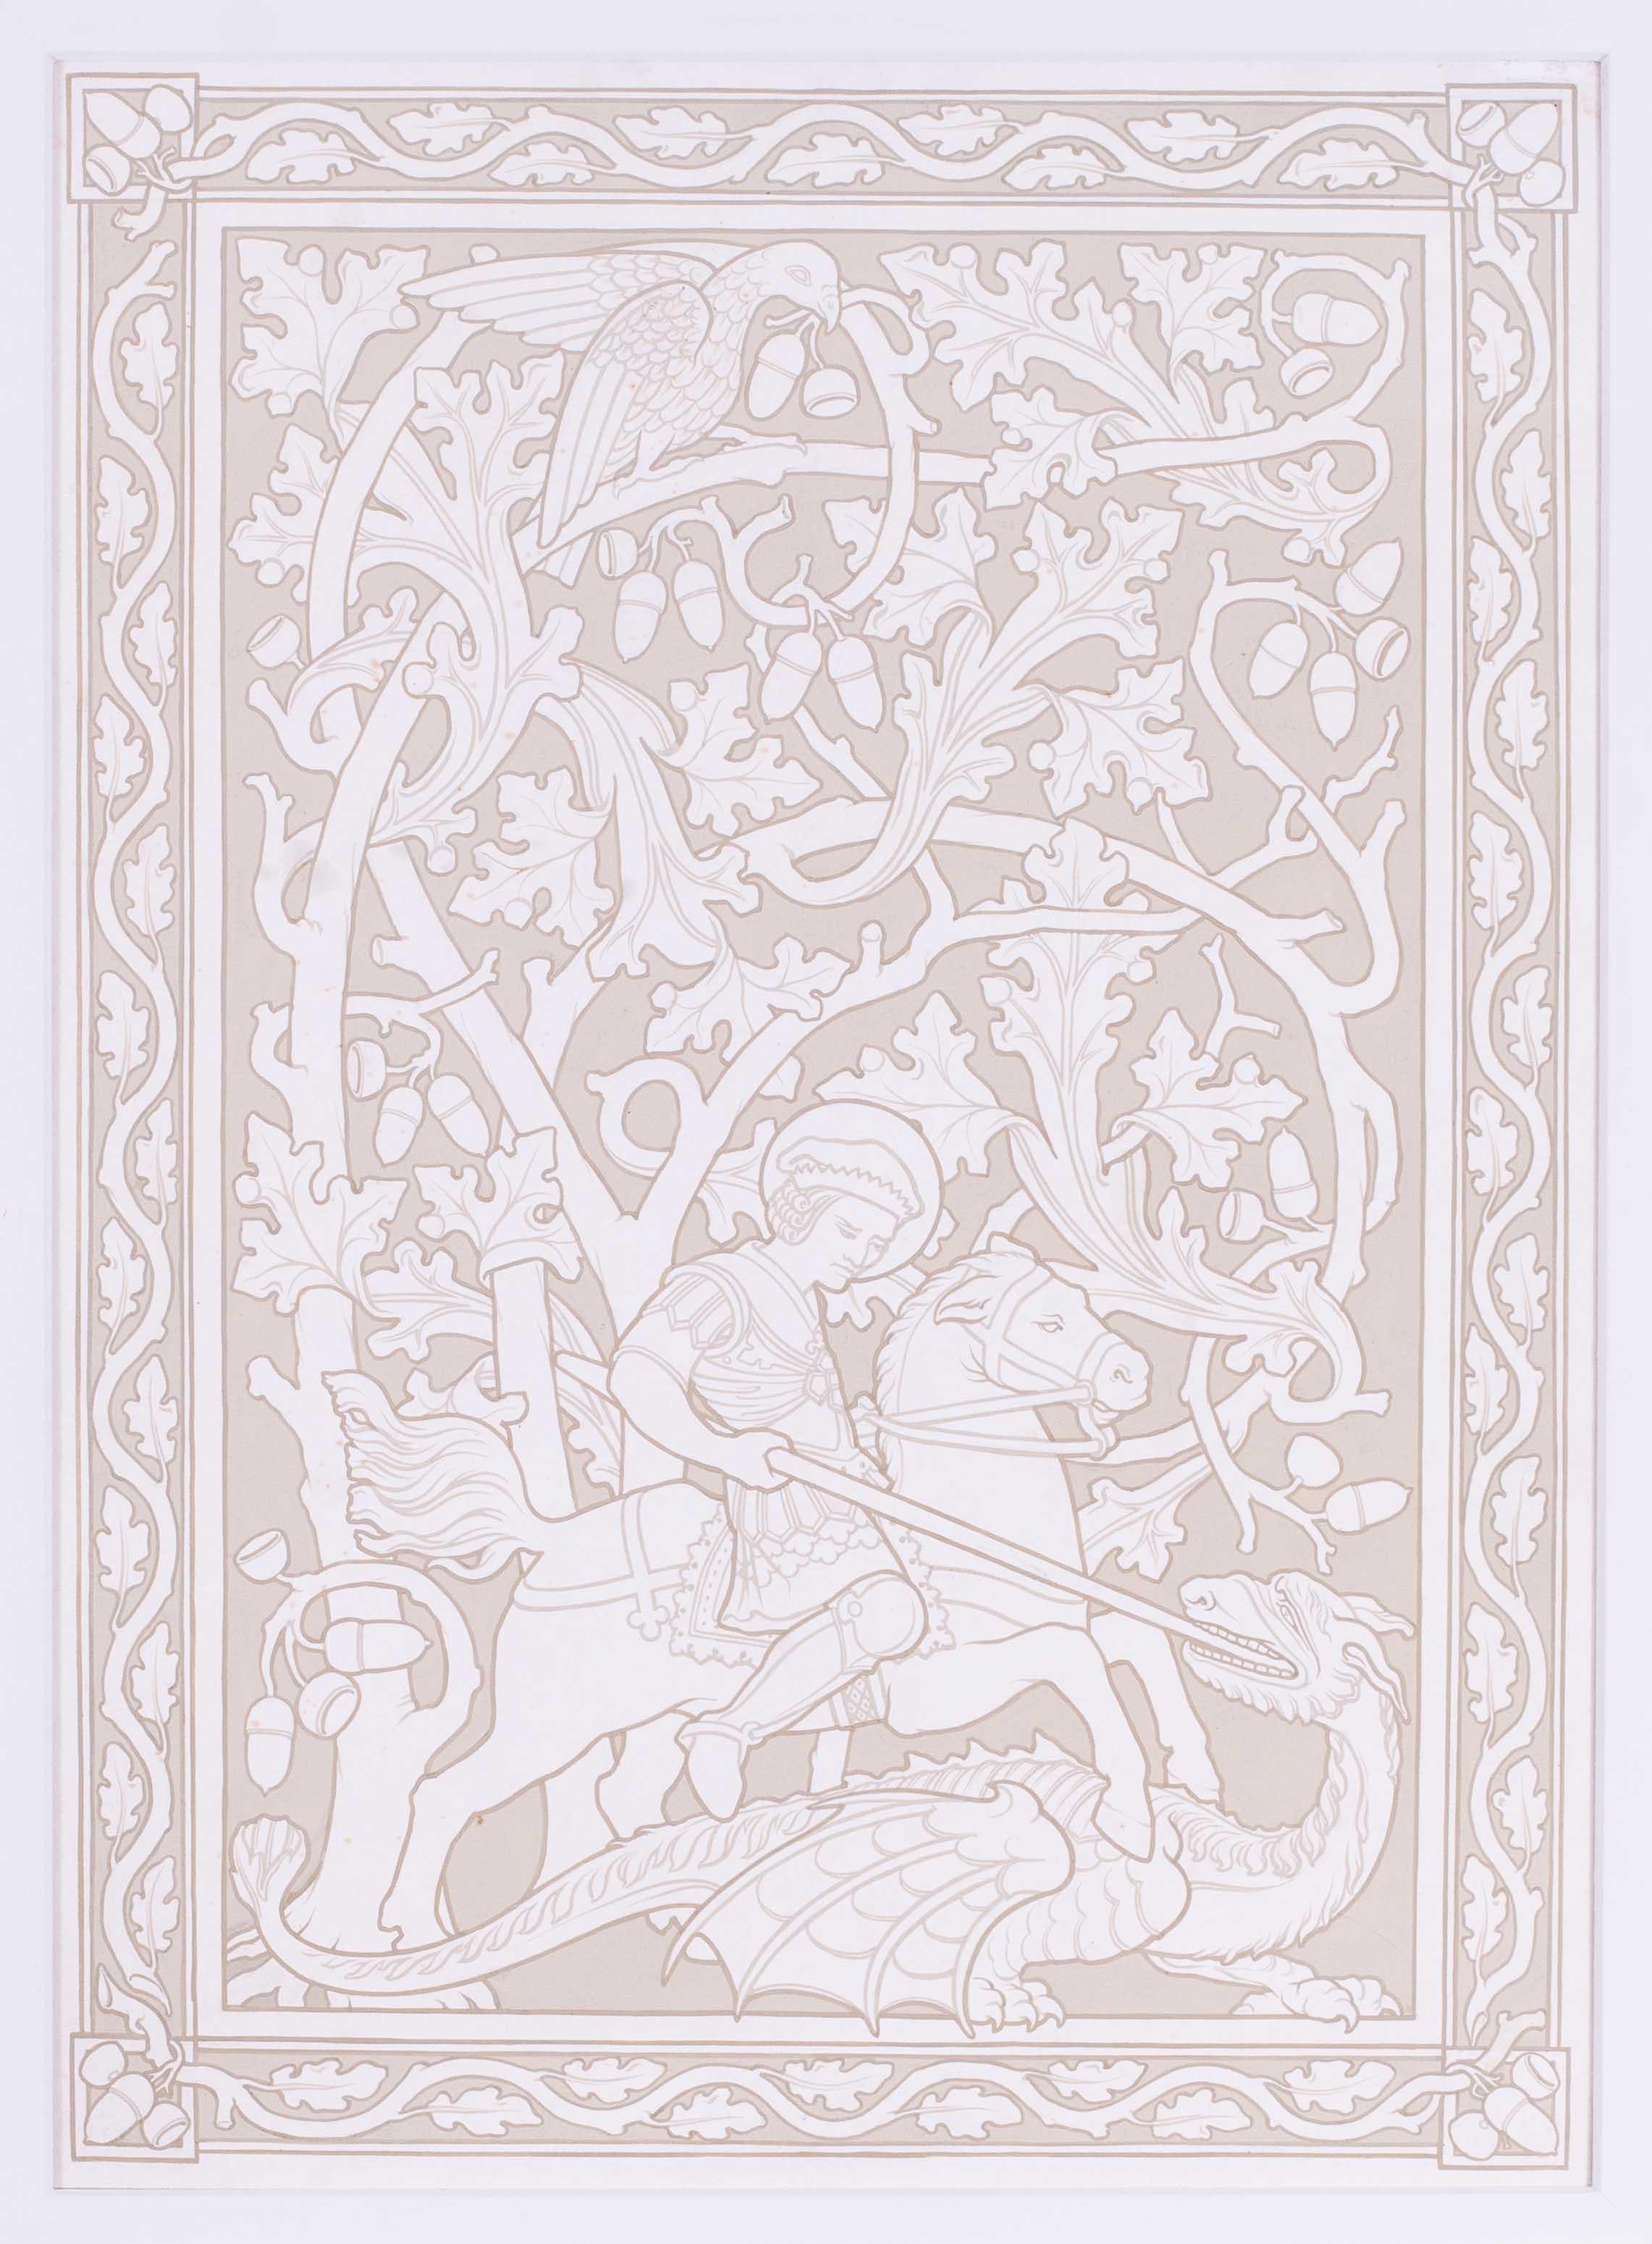 British, early 20th Century design of George and the Dragon by Edward Ridley For Sale 5